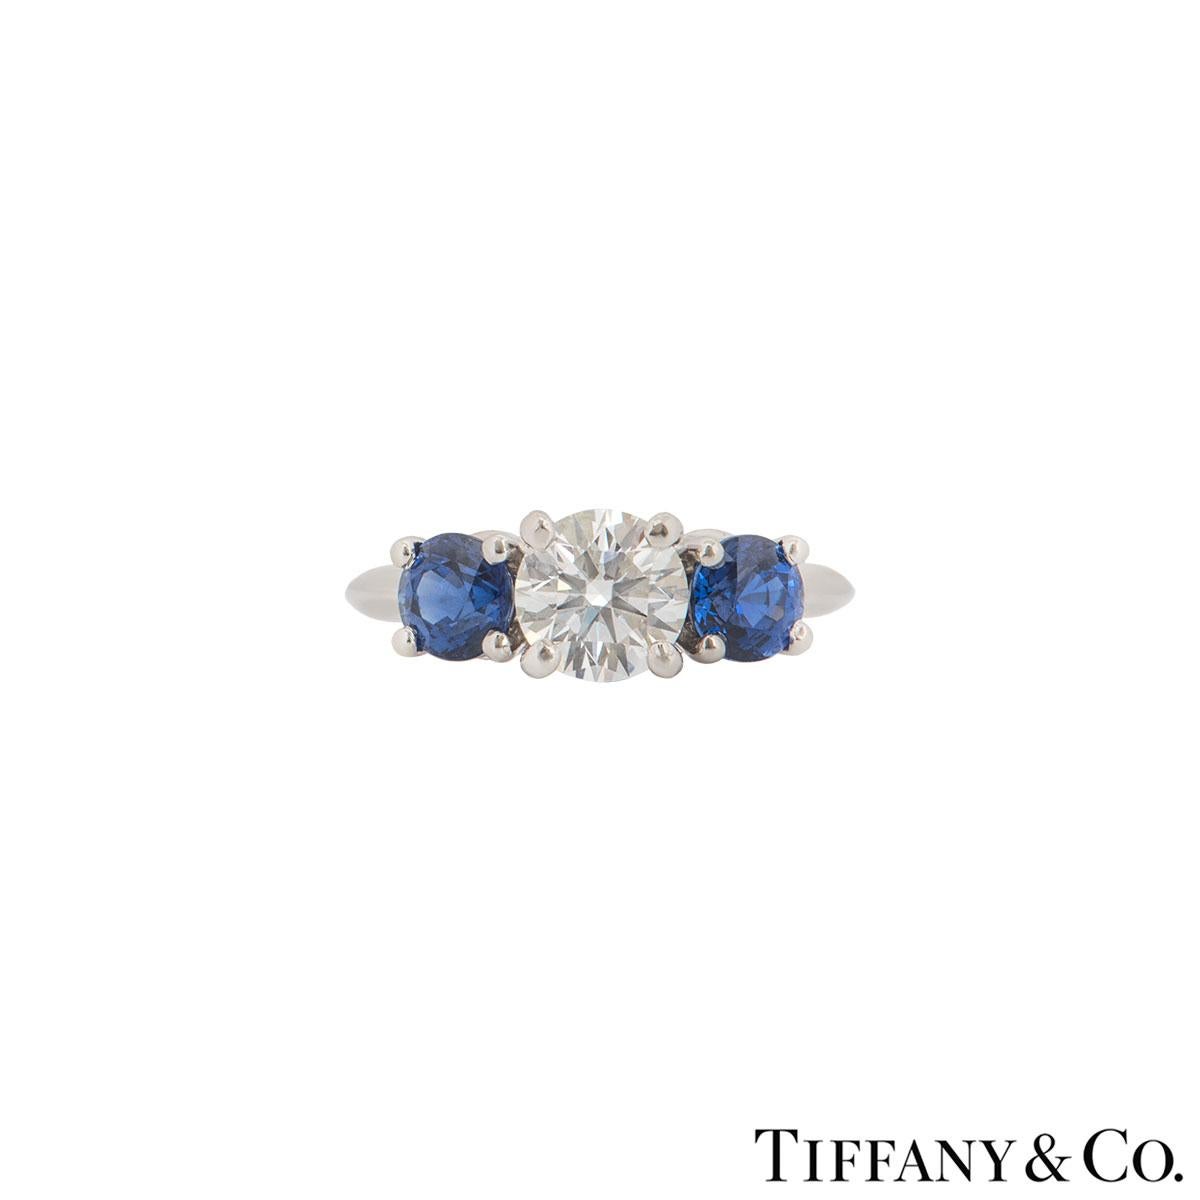 A stunning platinum diamond and sapphire ring by Tiffany & Co.. The ring comprises of a round brilliant cut diamond in the centre with a sapphire stone on each side all in a four claw setting. The round brilliant cut diamond has a weight of 1.06ct,